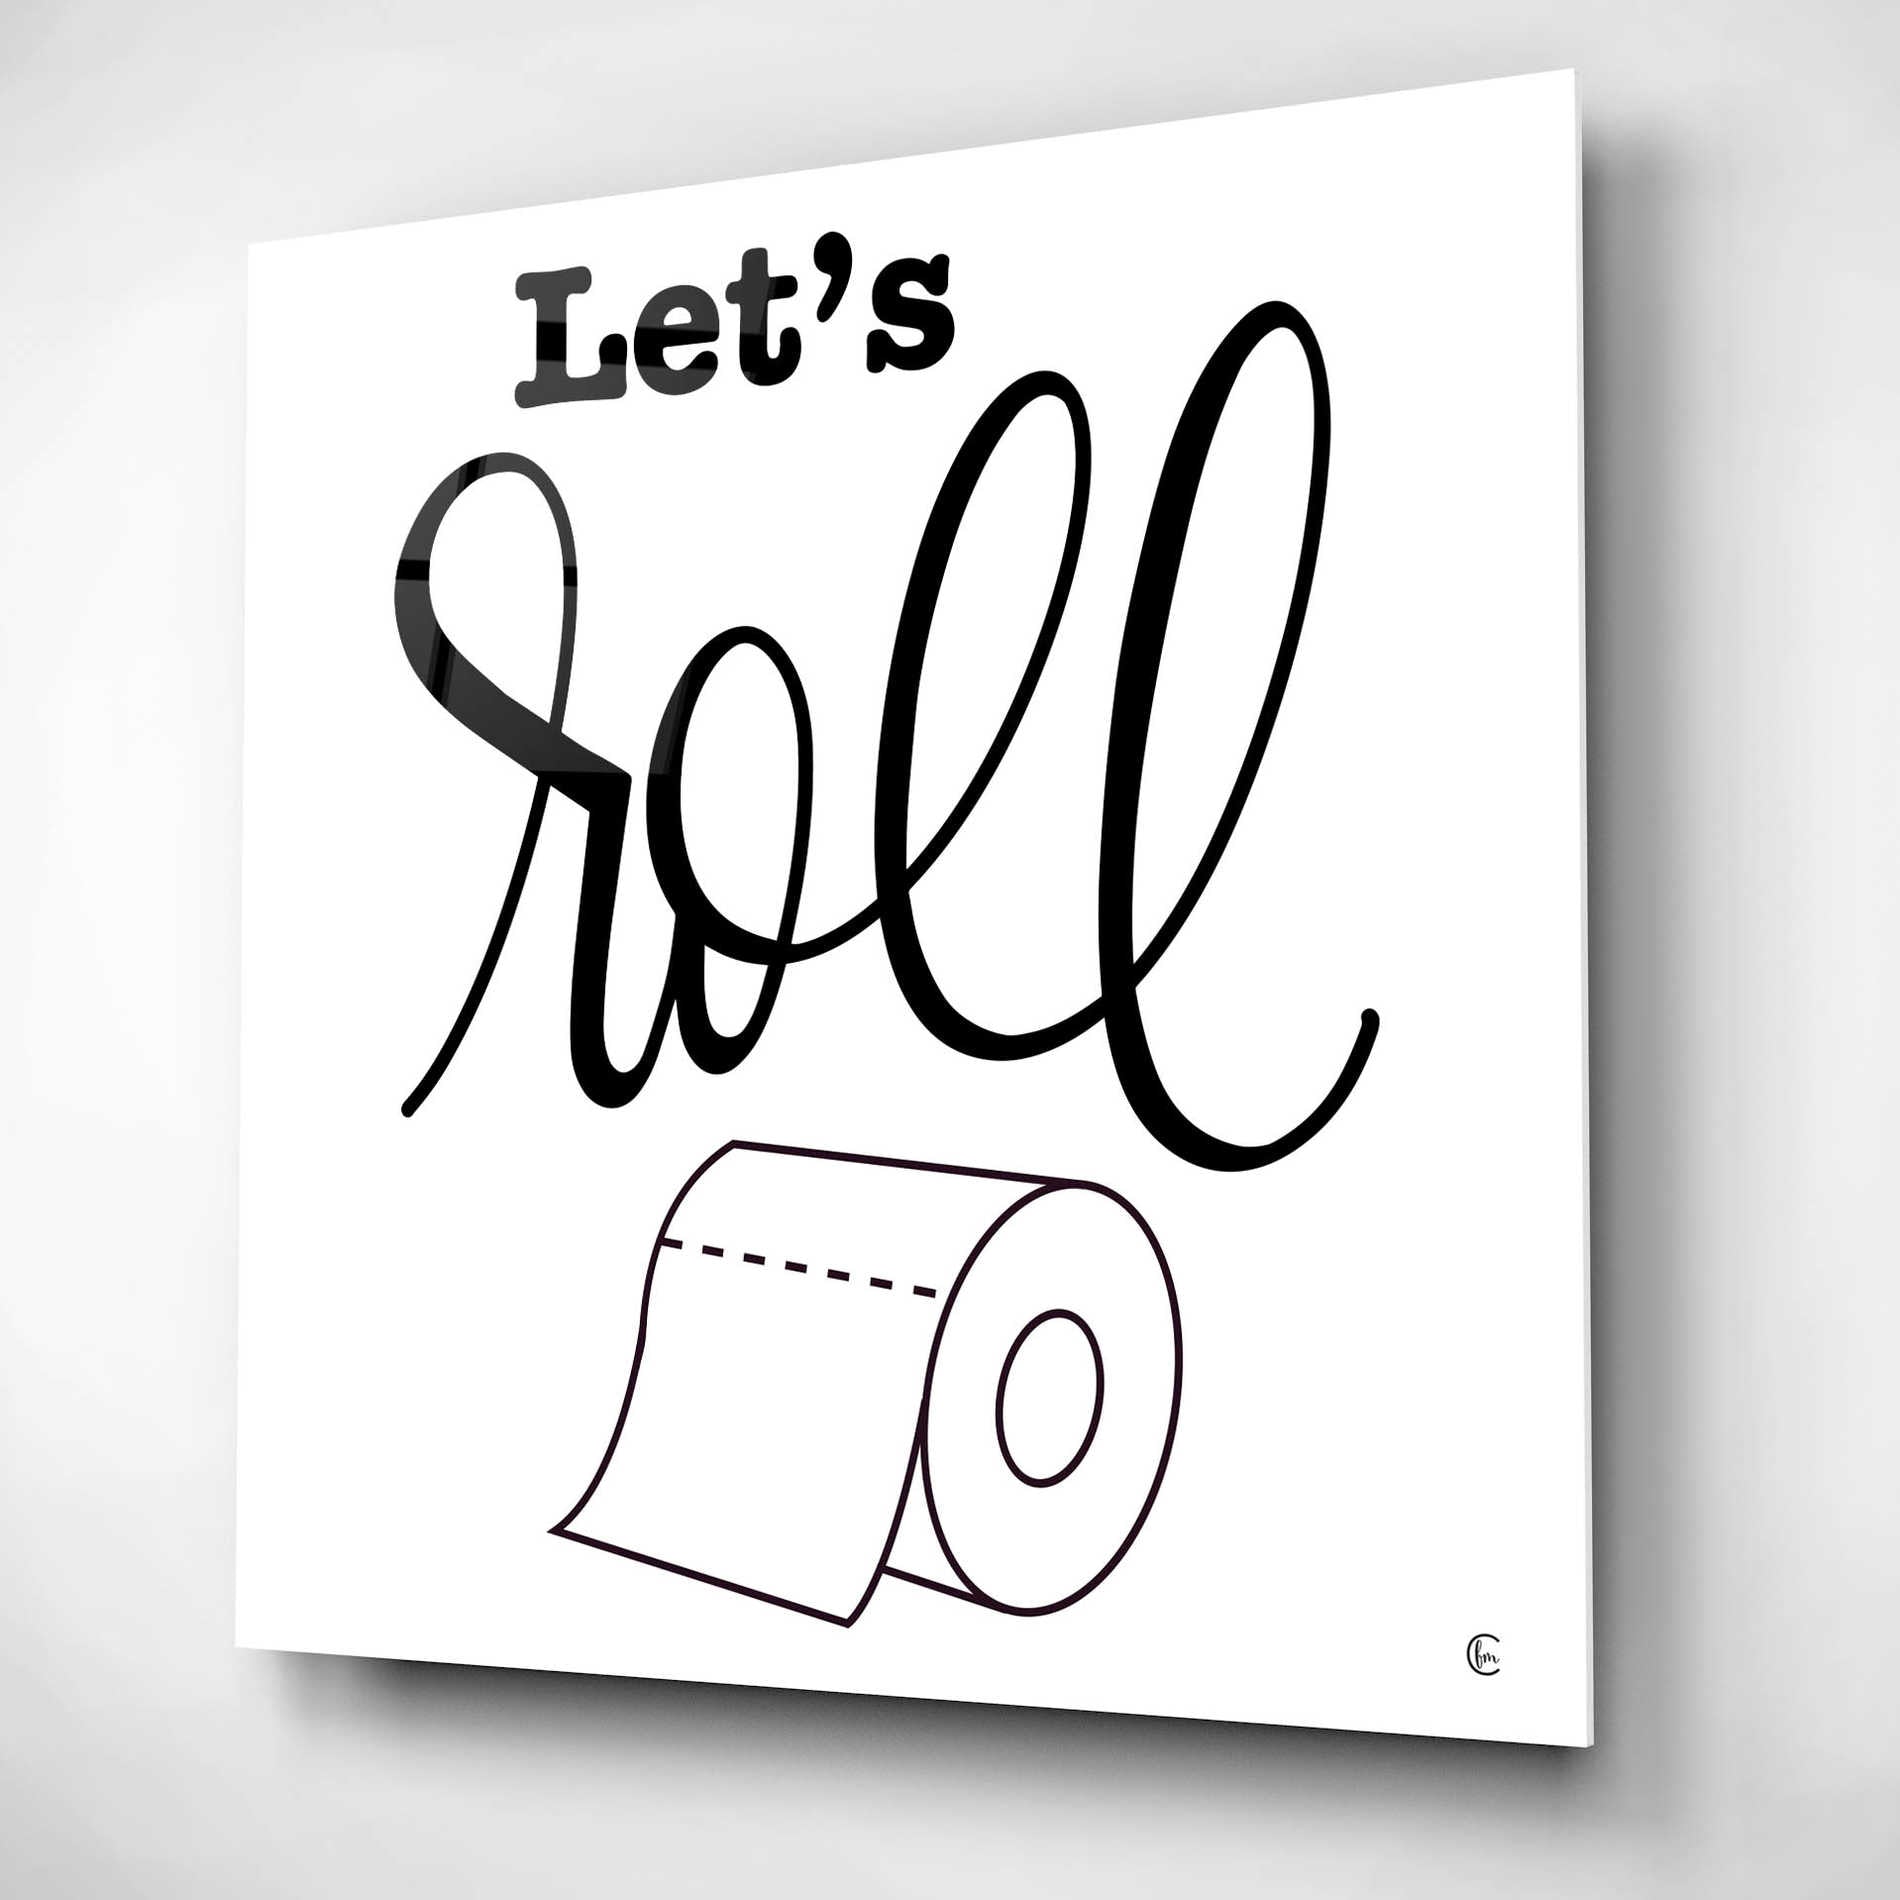 Epic Art 'Let's Roll' by Fearfully Made Creations, Acrylic Glass Wall Art,12x12